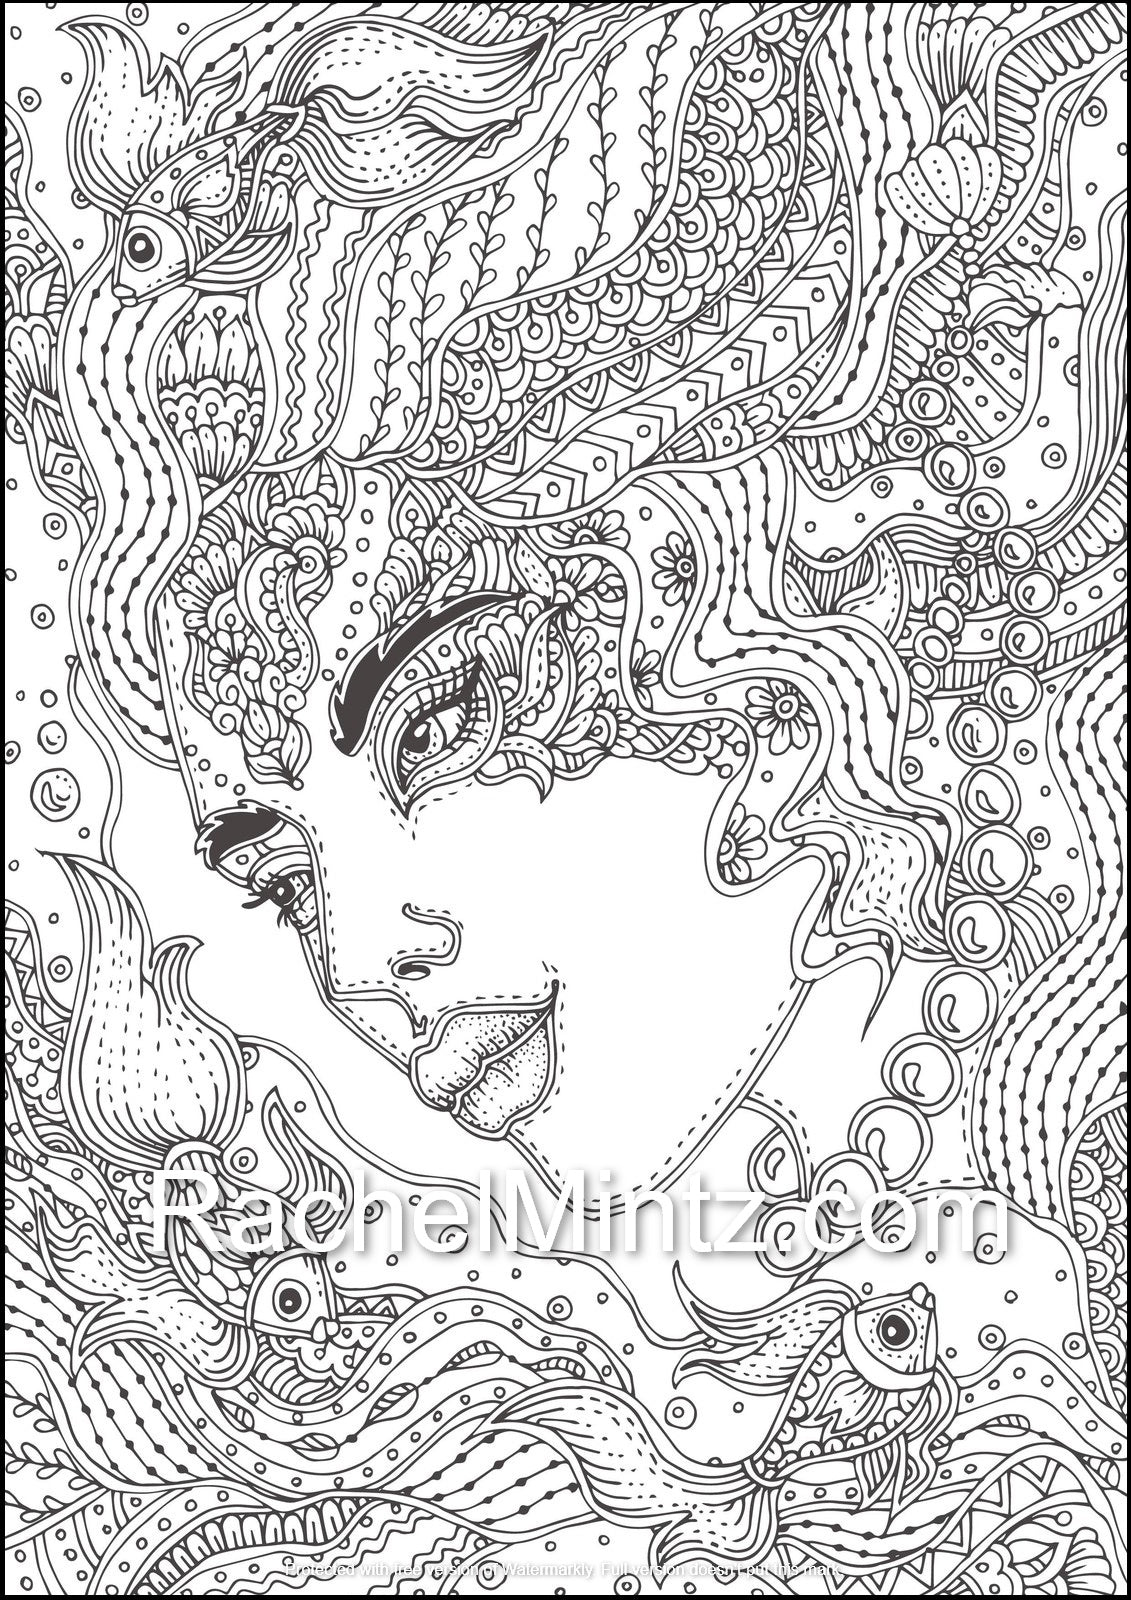 Ethnic Women - Beautiful Girls In Multicultural Fashion & Clothing From Around The World Printable Format Coloring Book